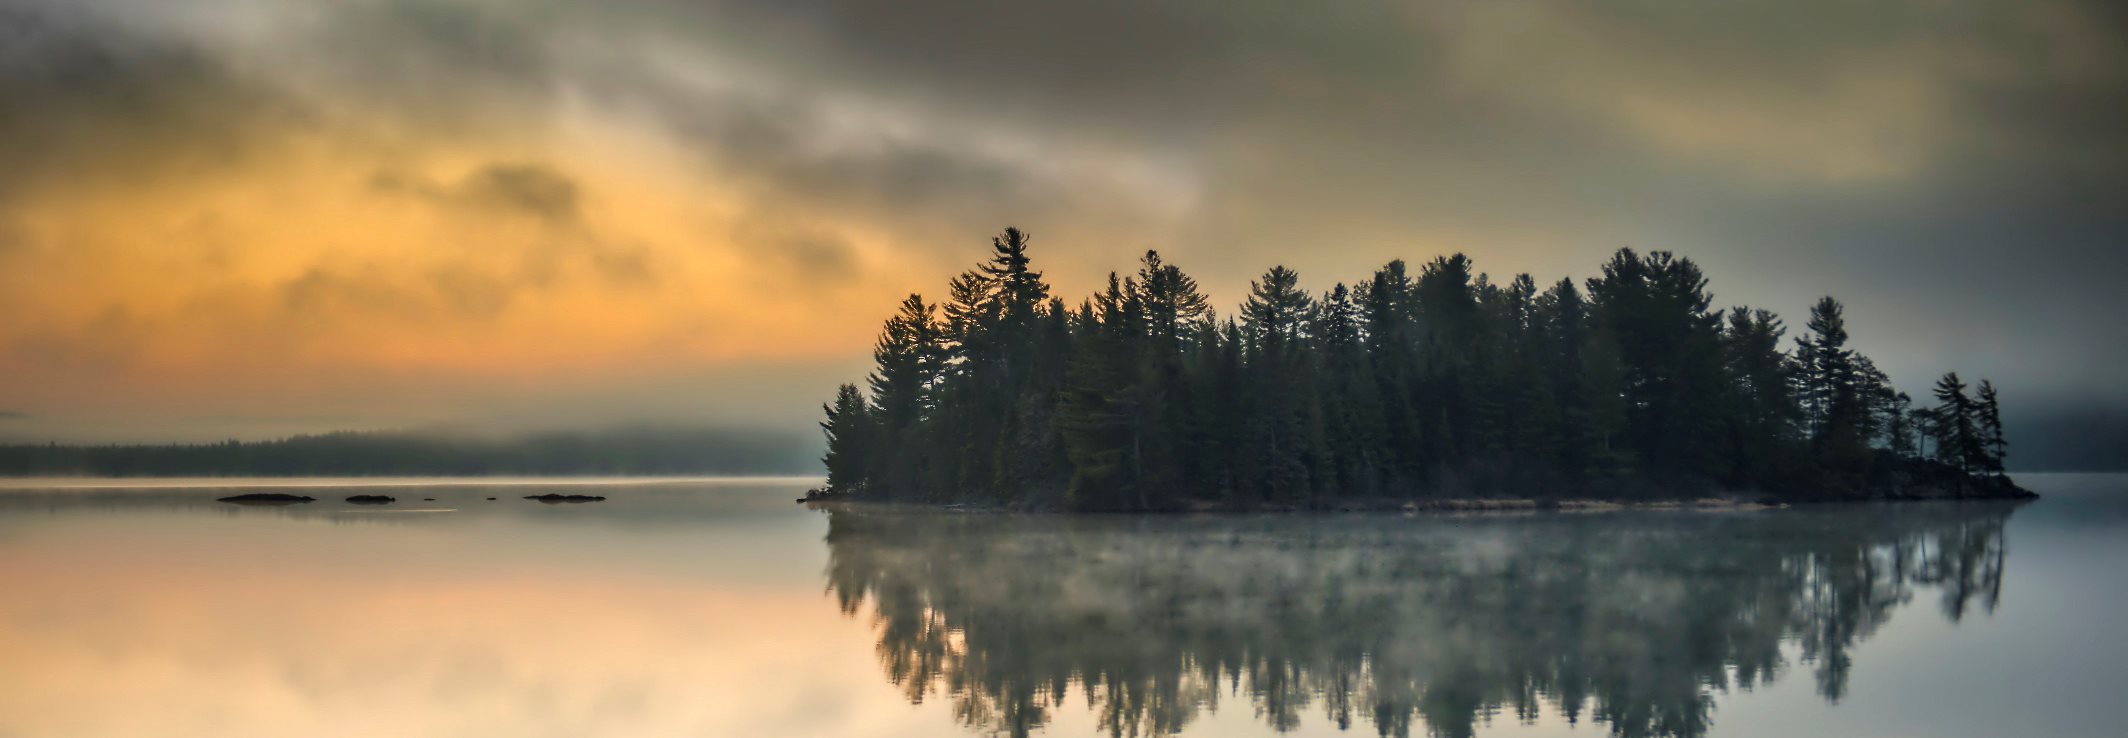 Misty island in lake at sunset Photo: Ontario Tourism